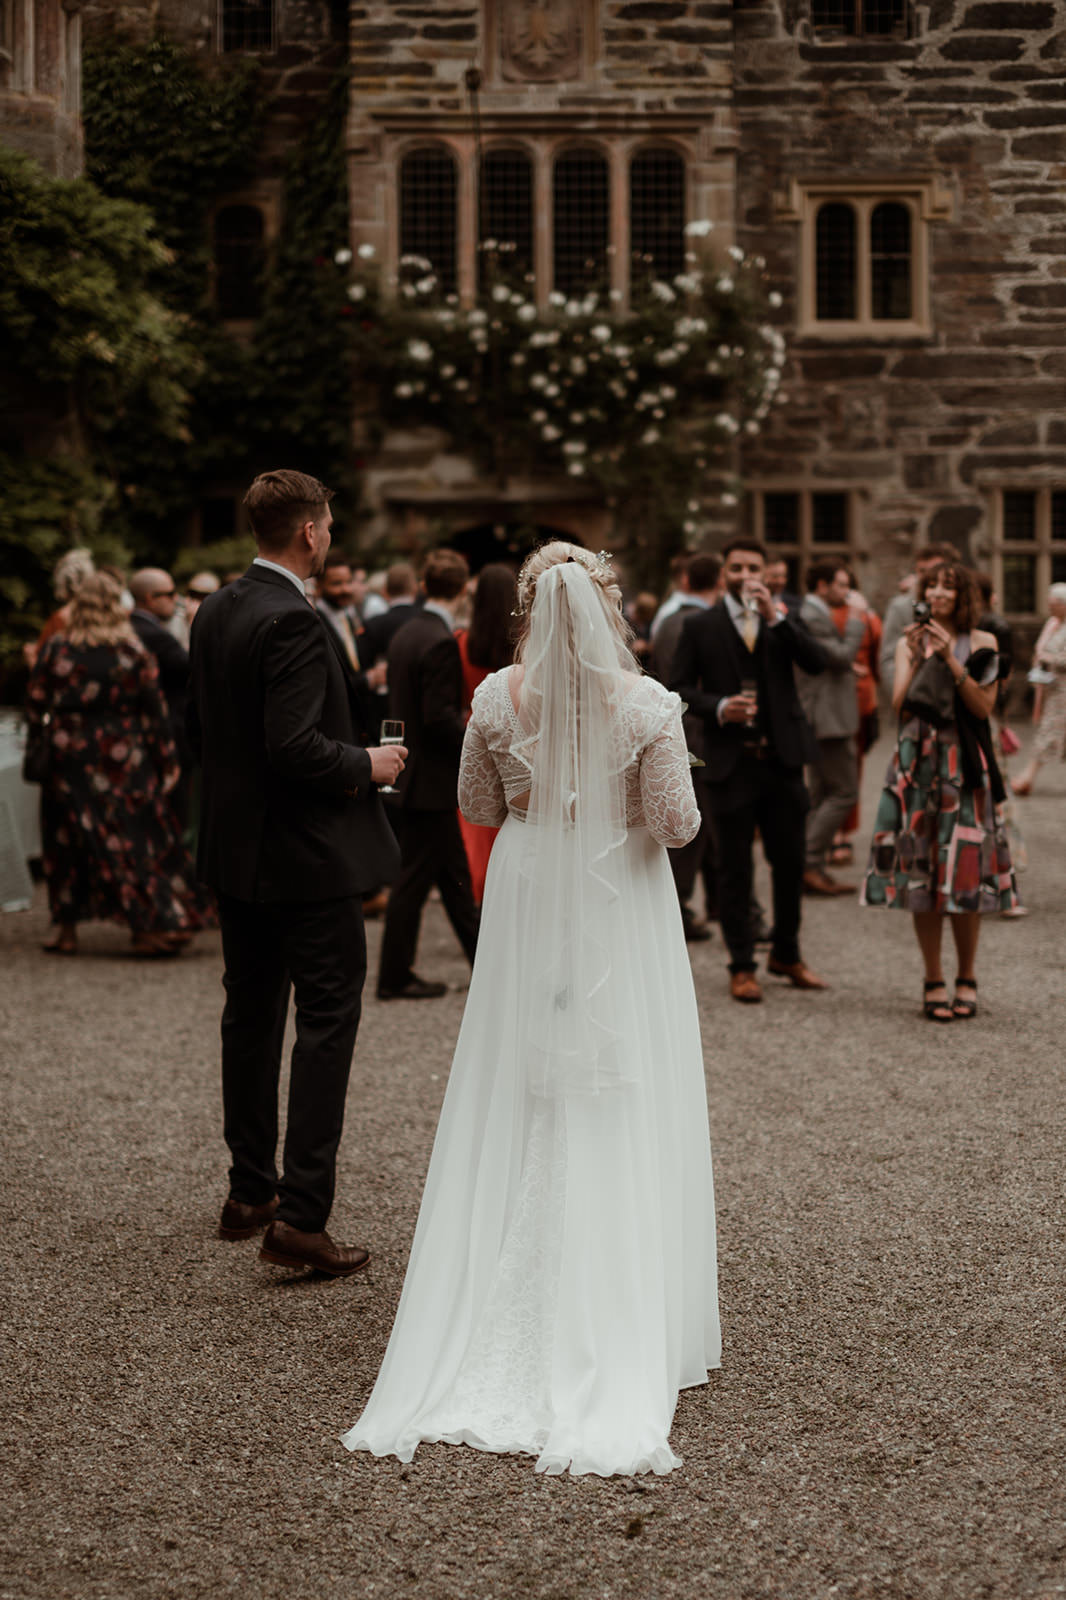 Observational wedding photography in North Wales at Gwydir Castle